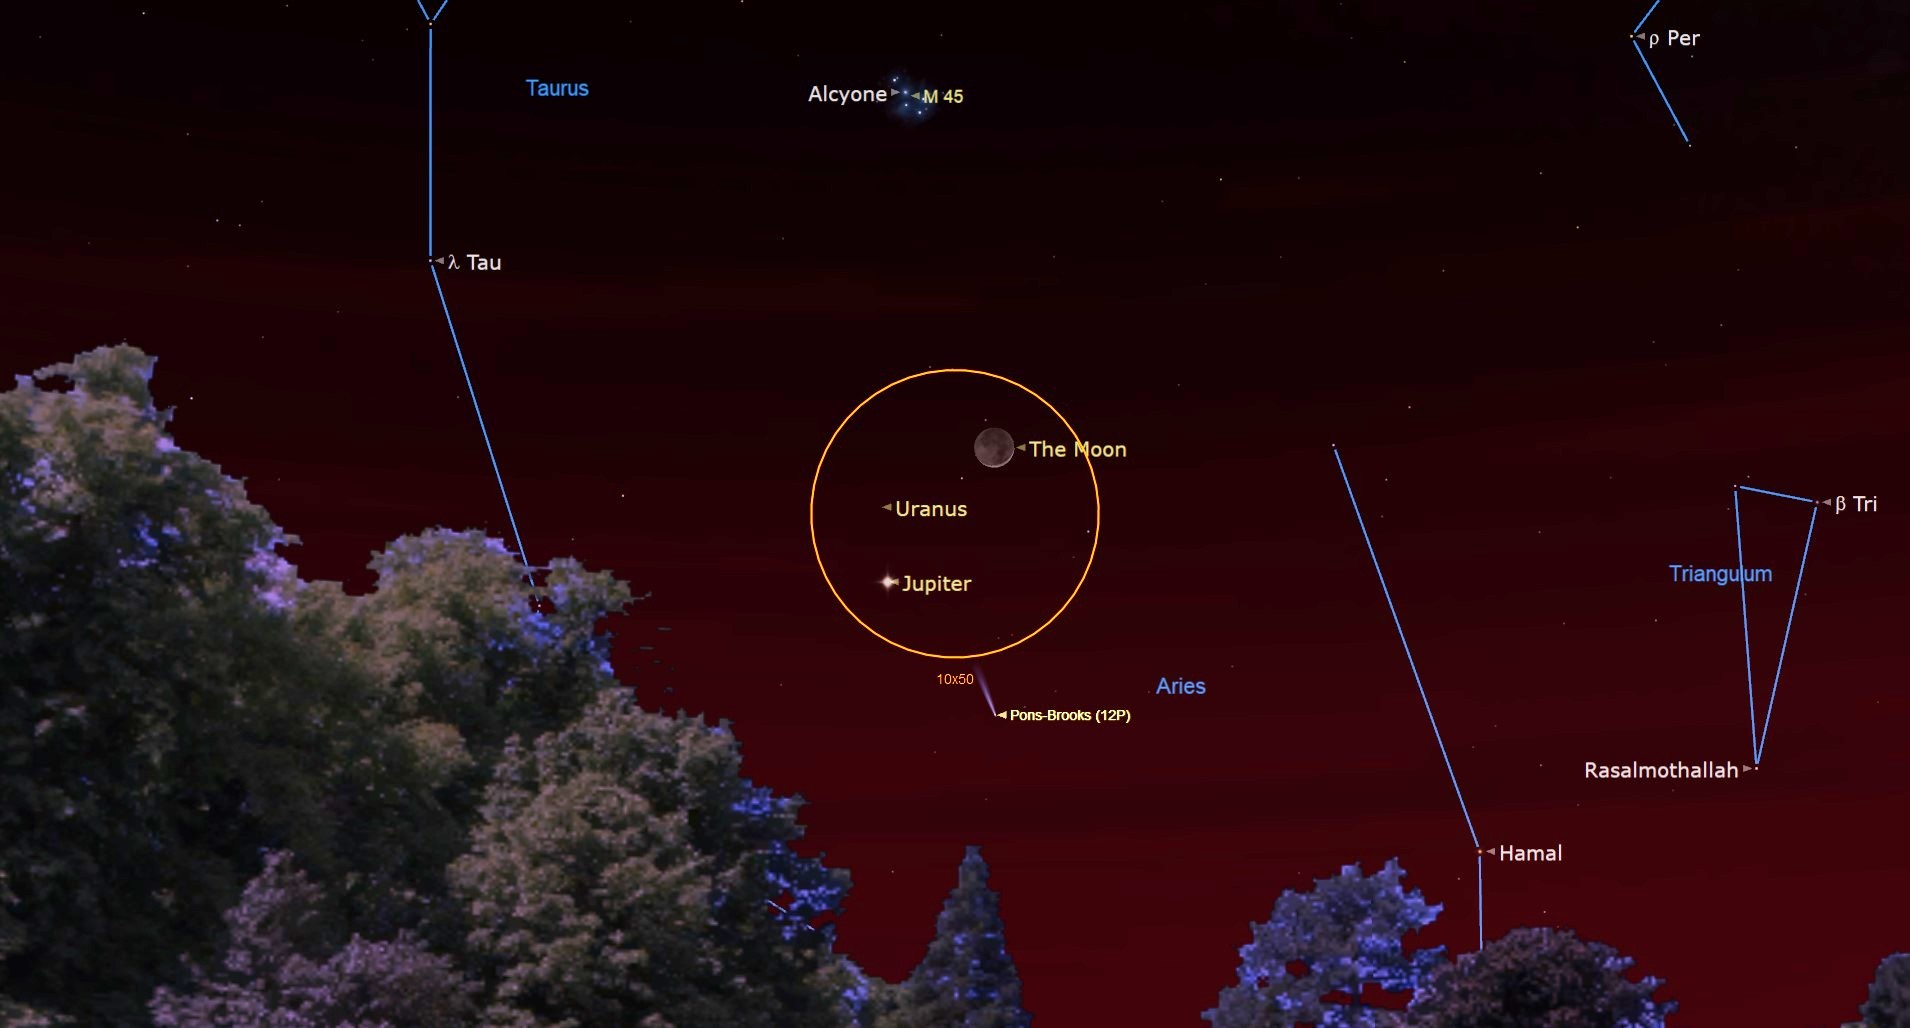 a red hued sky features a yellow circle in the center, surrounding a crescent moon, uranus and jupiter. other nearby constellations are traced in blue and labeled.